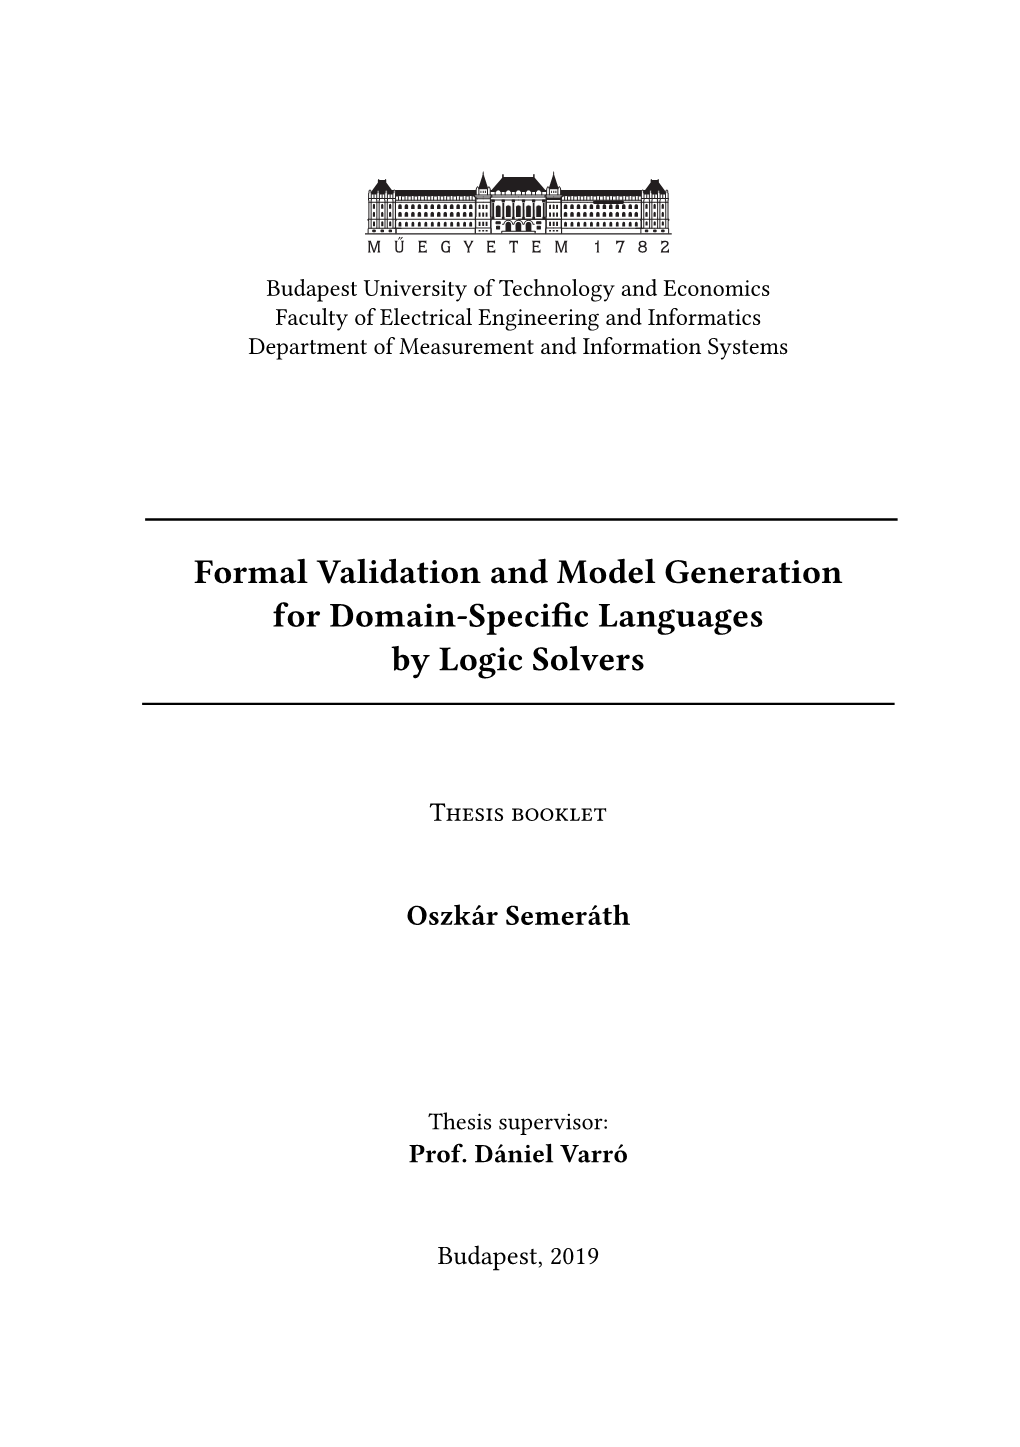 Formal Validation and Model Generationfor Domain-Specific